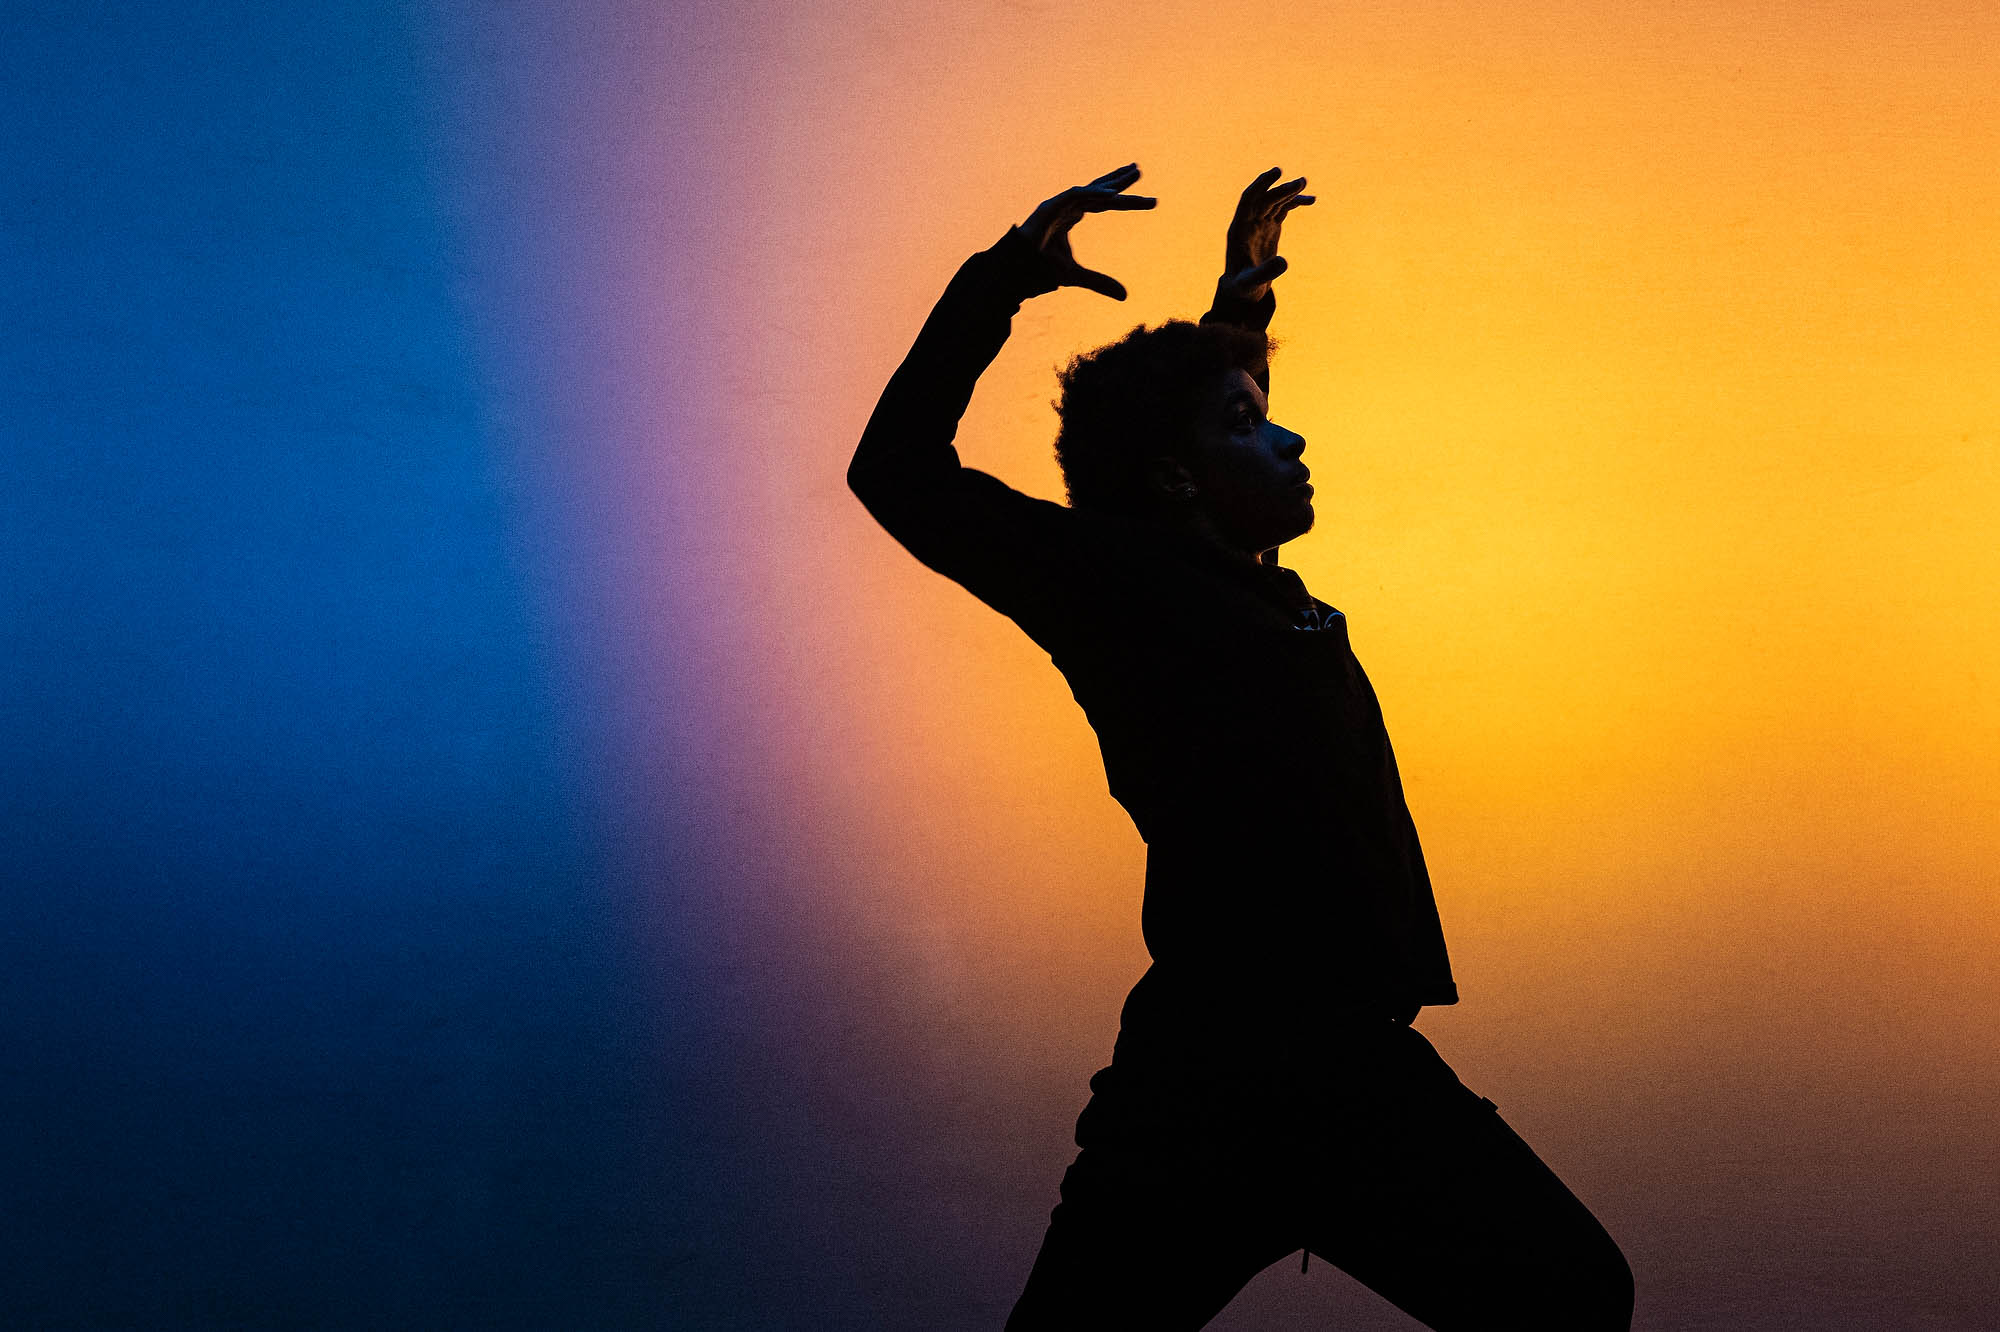 Silhouette of a person dancing with arms raised with blue and yellow lights behind them.